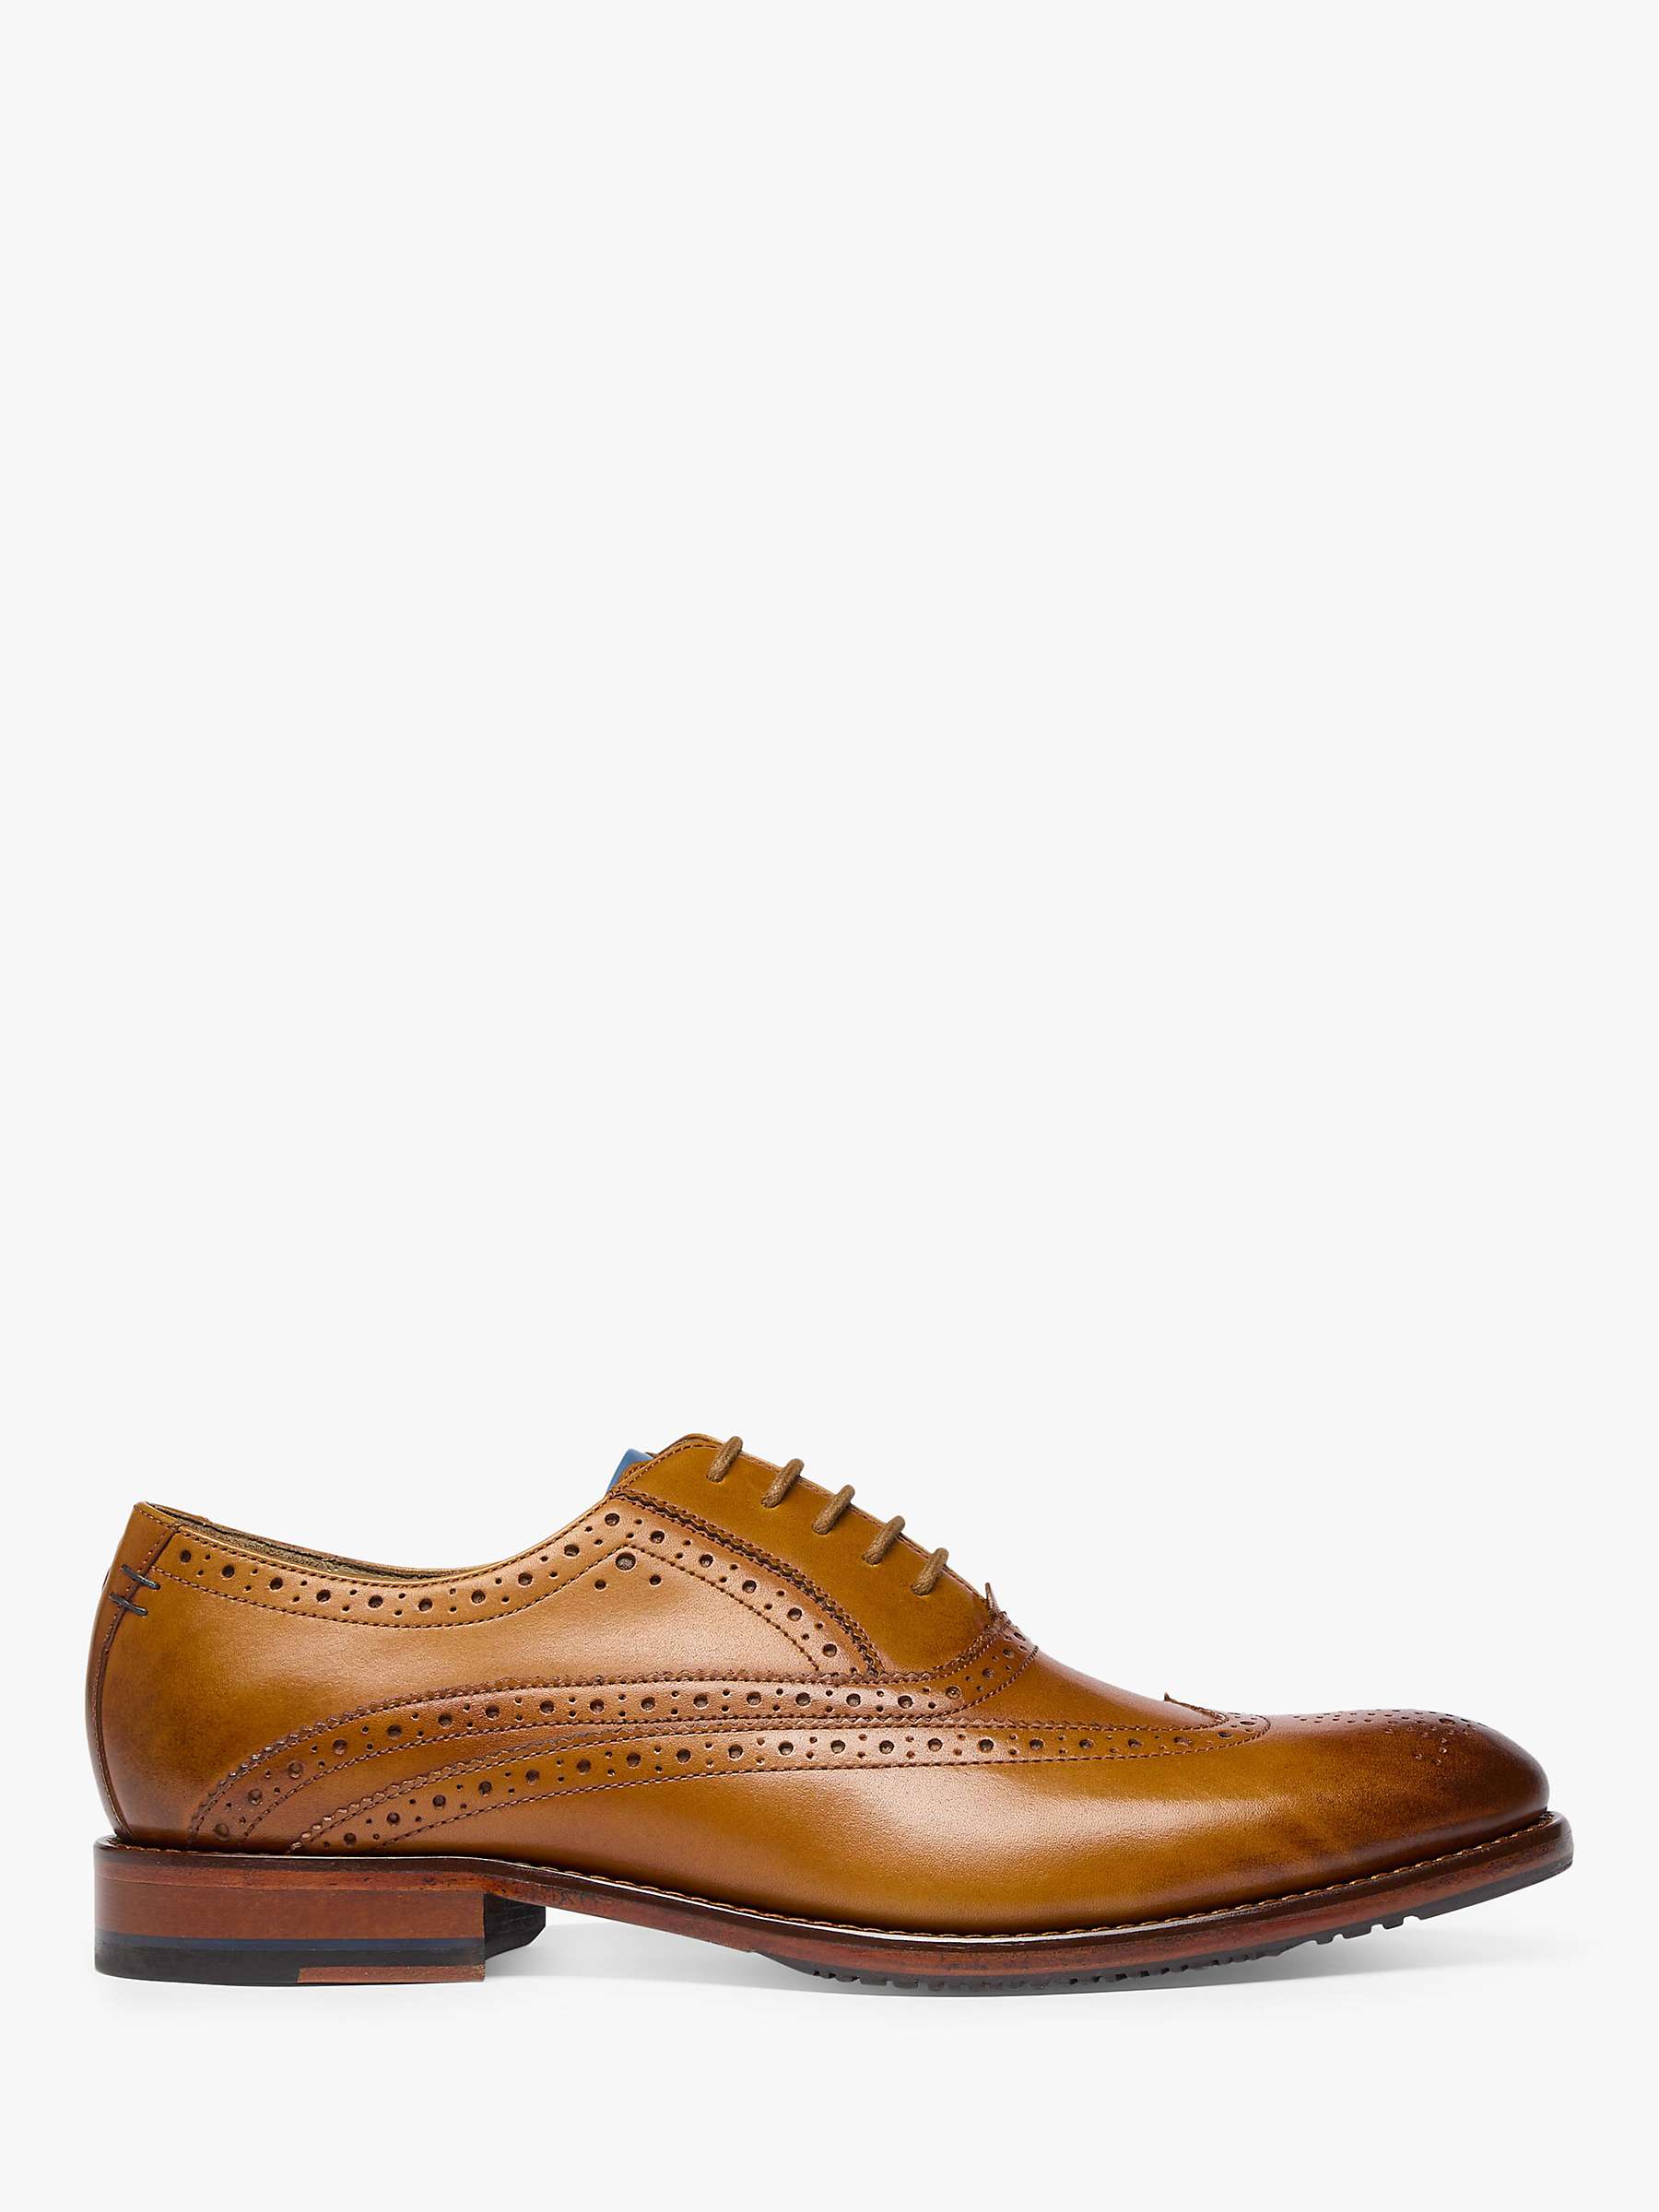 Buy Oliver Sweeney Ledwell Leather Brogues, Light Tan Online at johnlewis.com